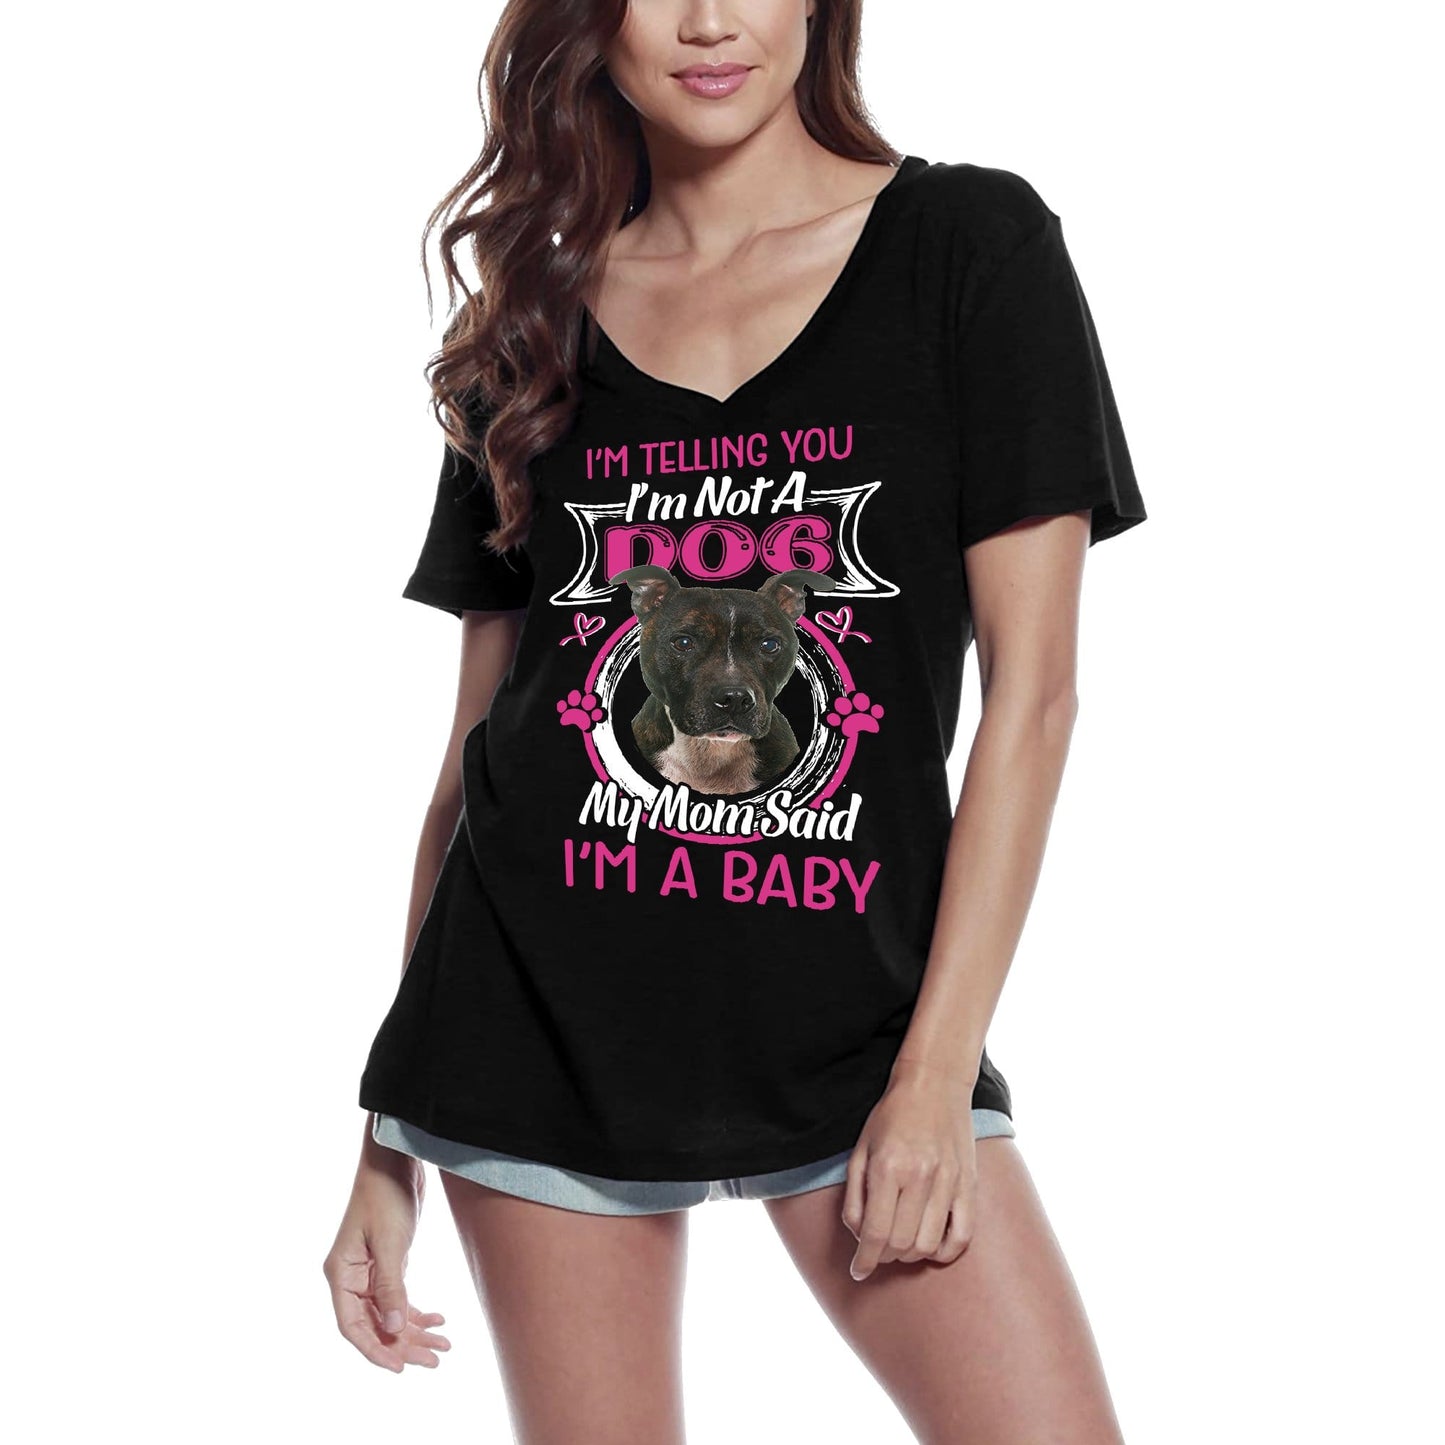 ULTRABASIC Women's T-Shirt I'm Telling You I'm Not a Staffordshire Bull Terrier - My Mom Said I'm a Baby - Cute Puppy Dog Lover Tee Shirt